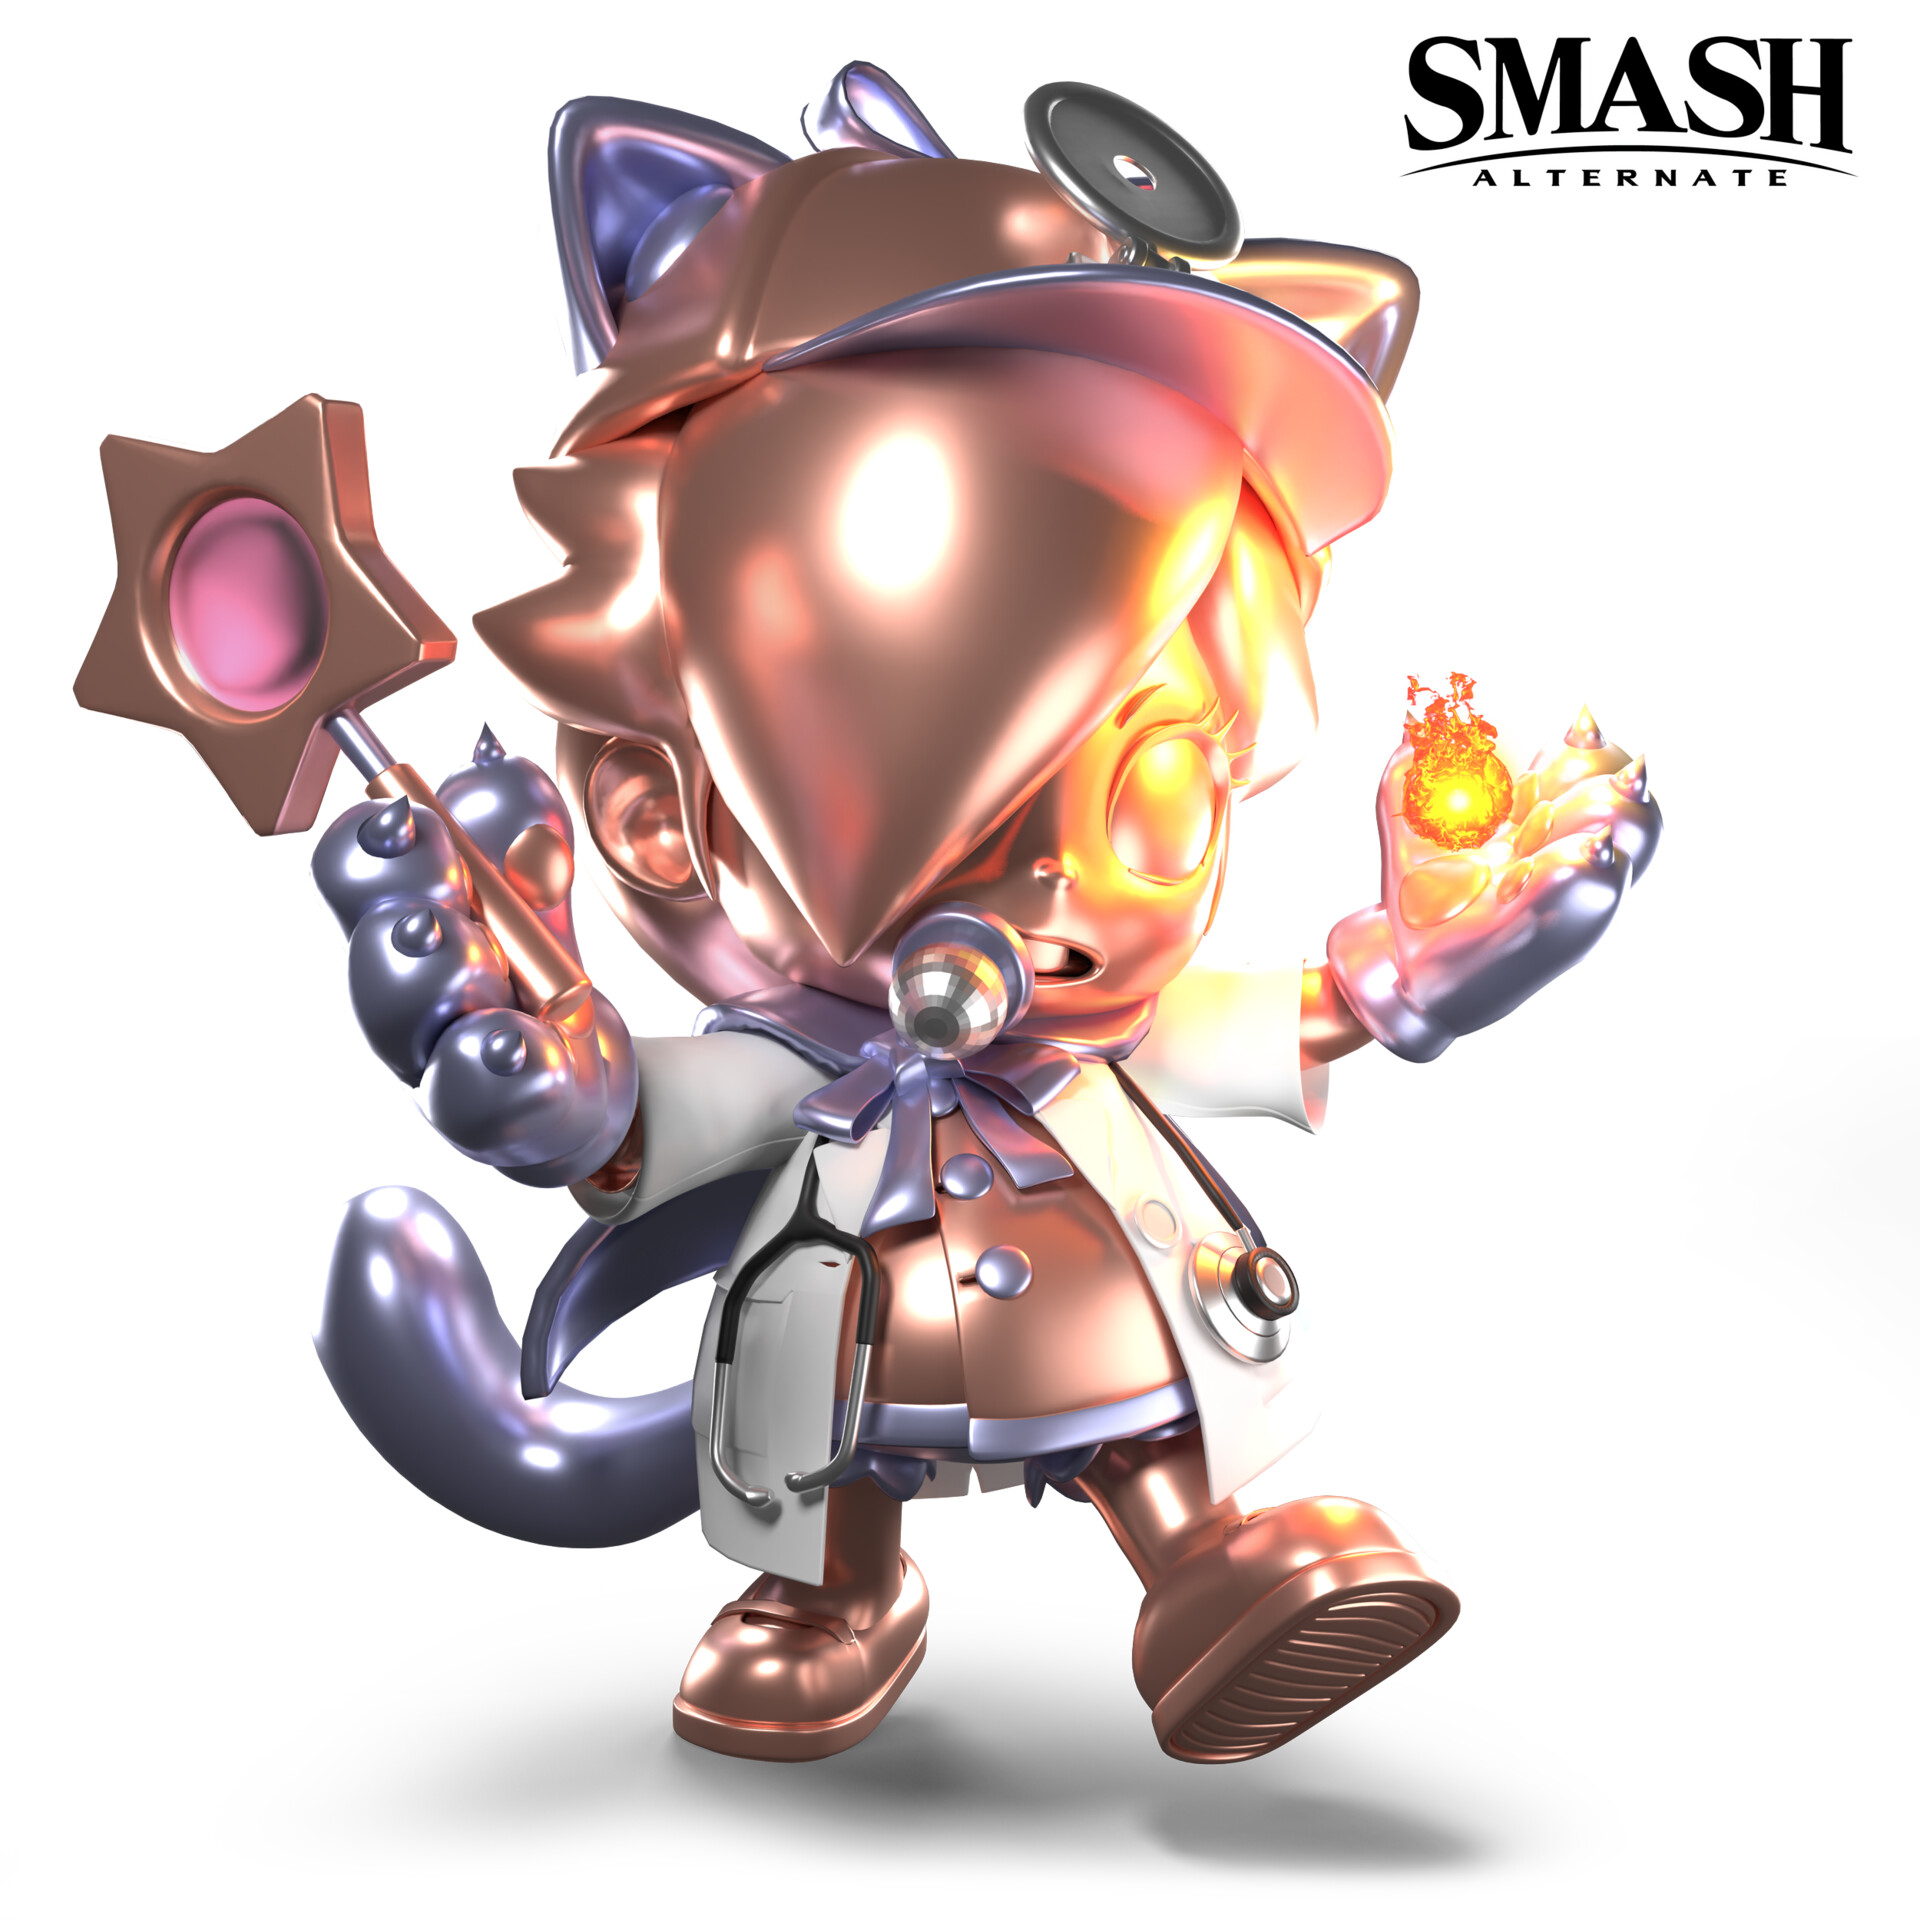 stephen-plant-dr-fire-pink-gold-cat-detective-baby-rosalina-small.jpg